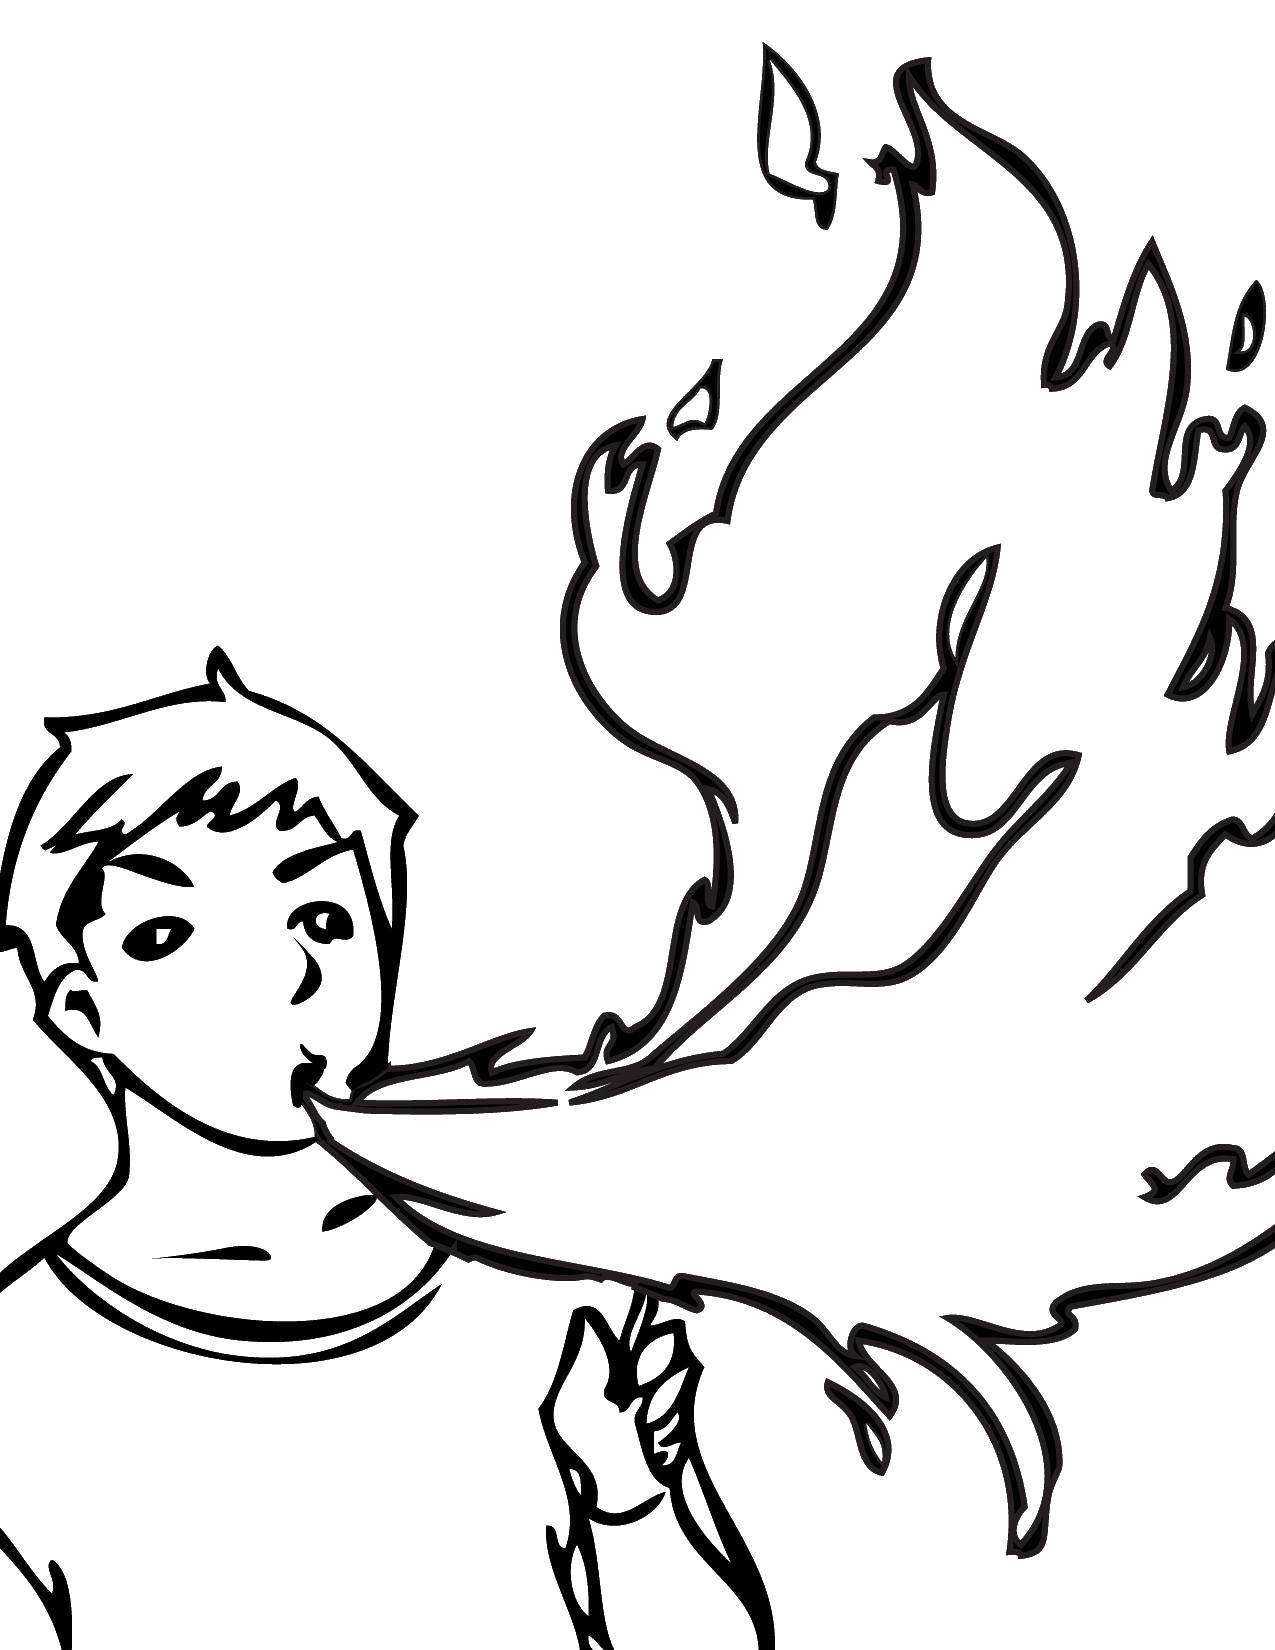 Coloring The guy breathes fire. Category Fire. Tags:  Fire, fire.